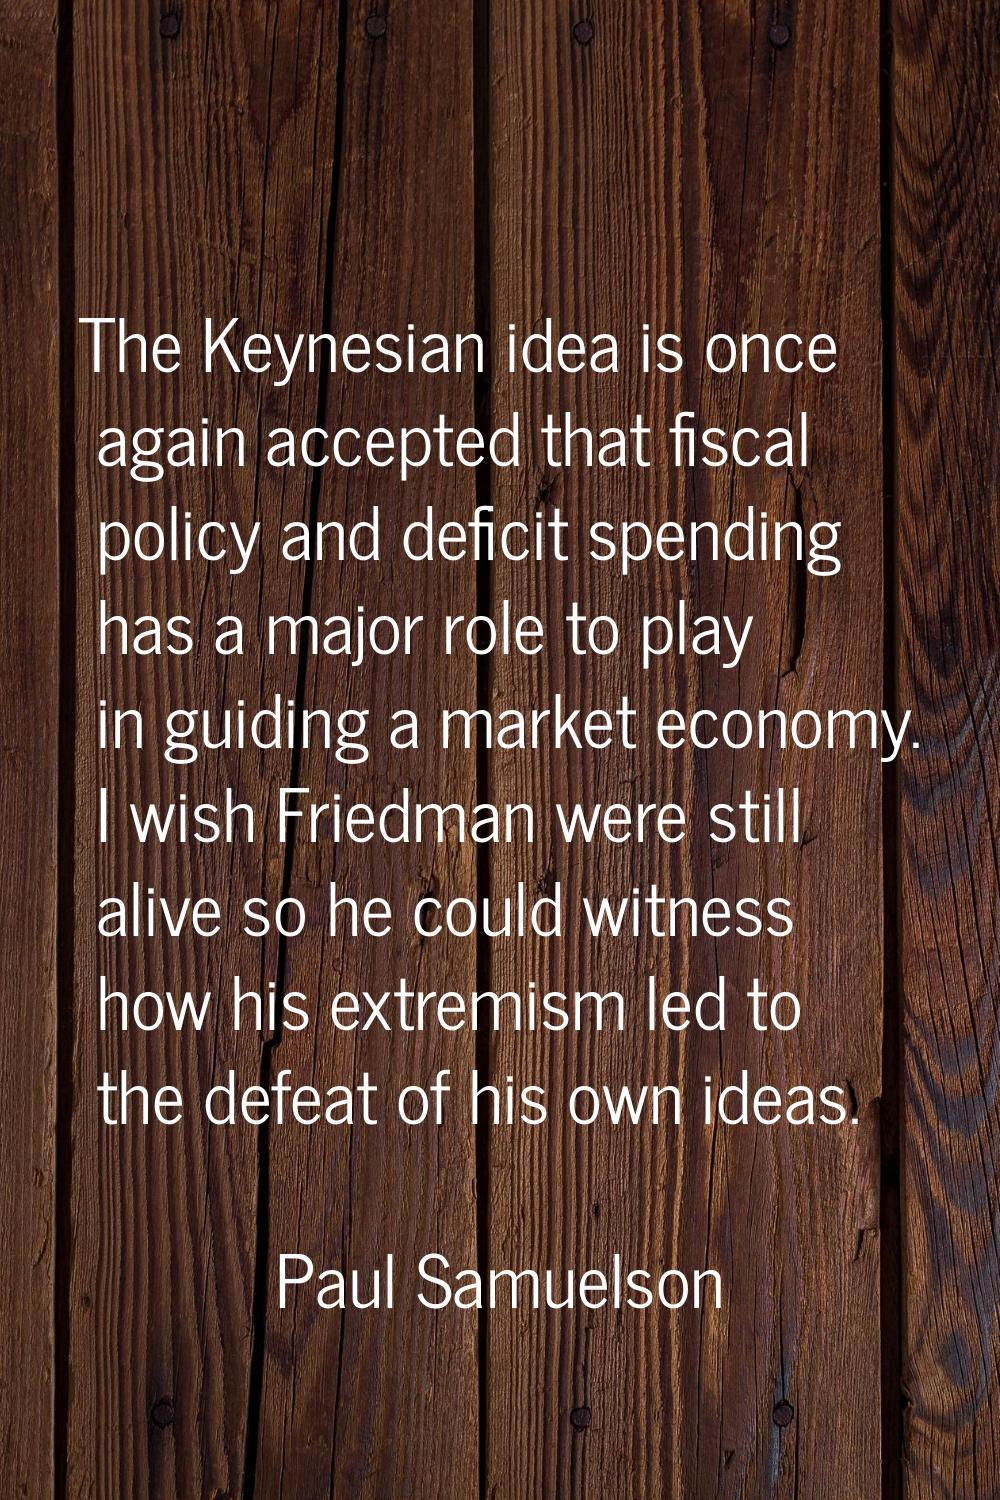 The Keynesian idea is once again accepted that fiscal policy and deficit spending has a major role 